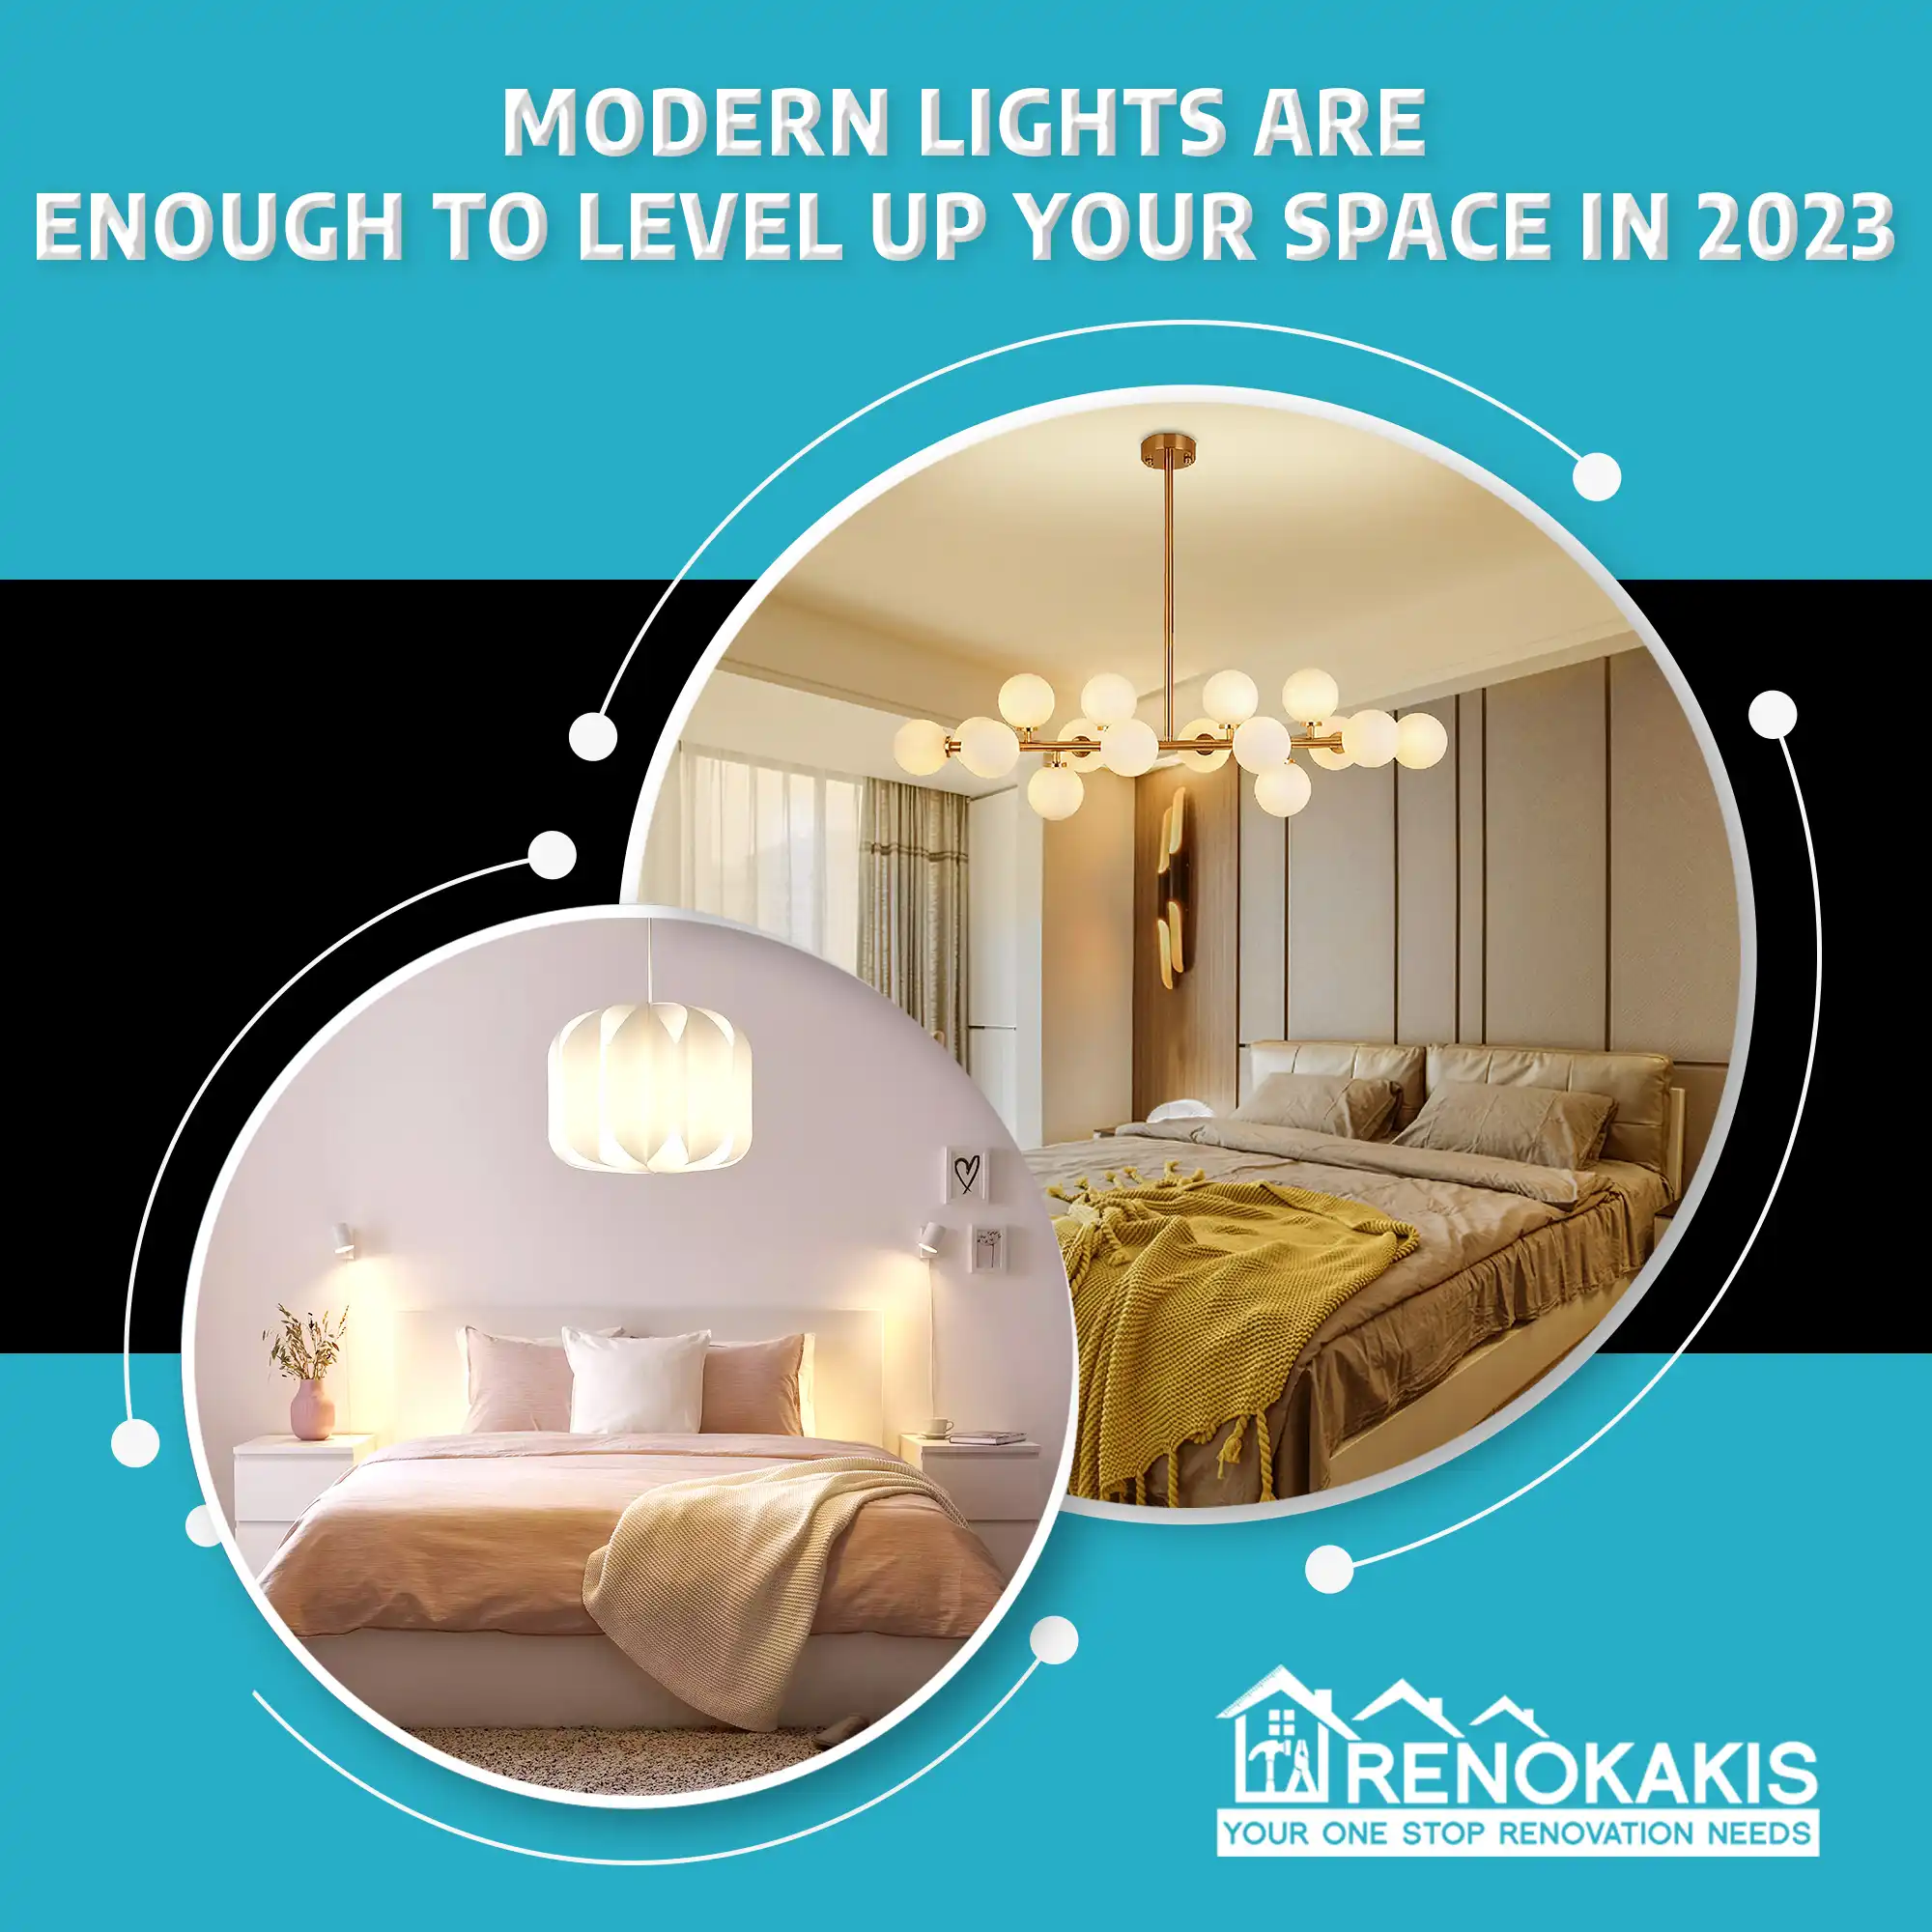 Modern Lights are enough to Level up your Space in 2023